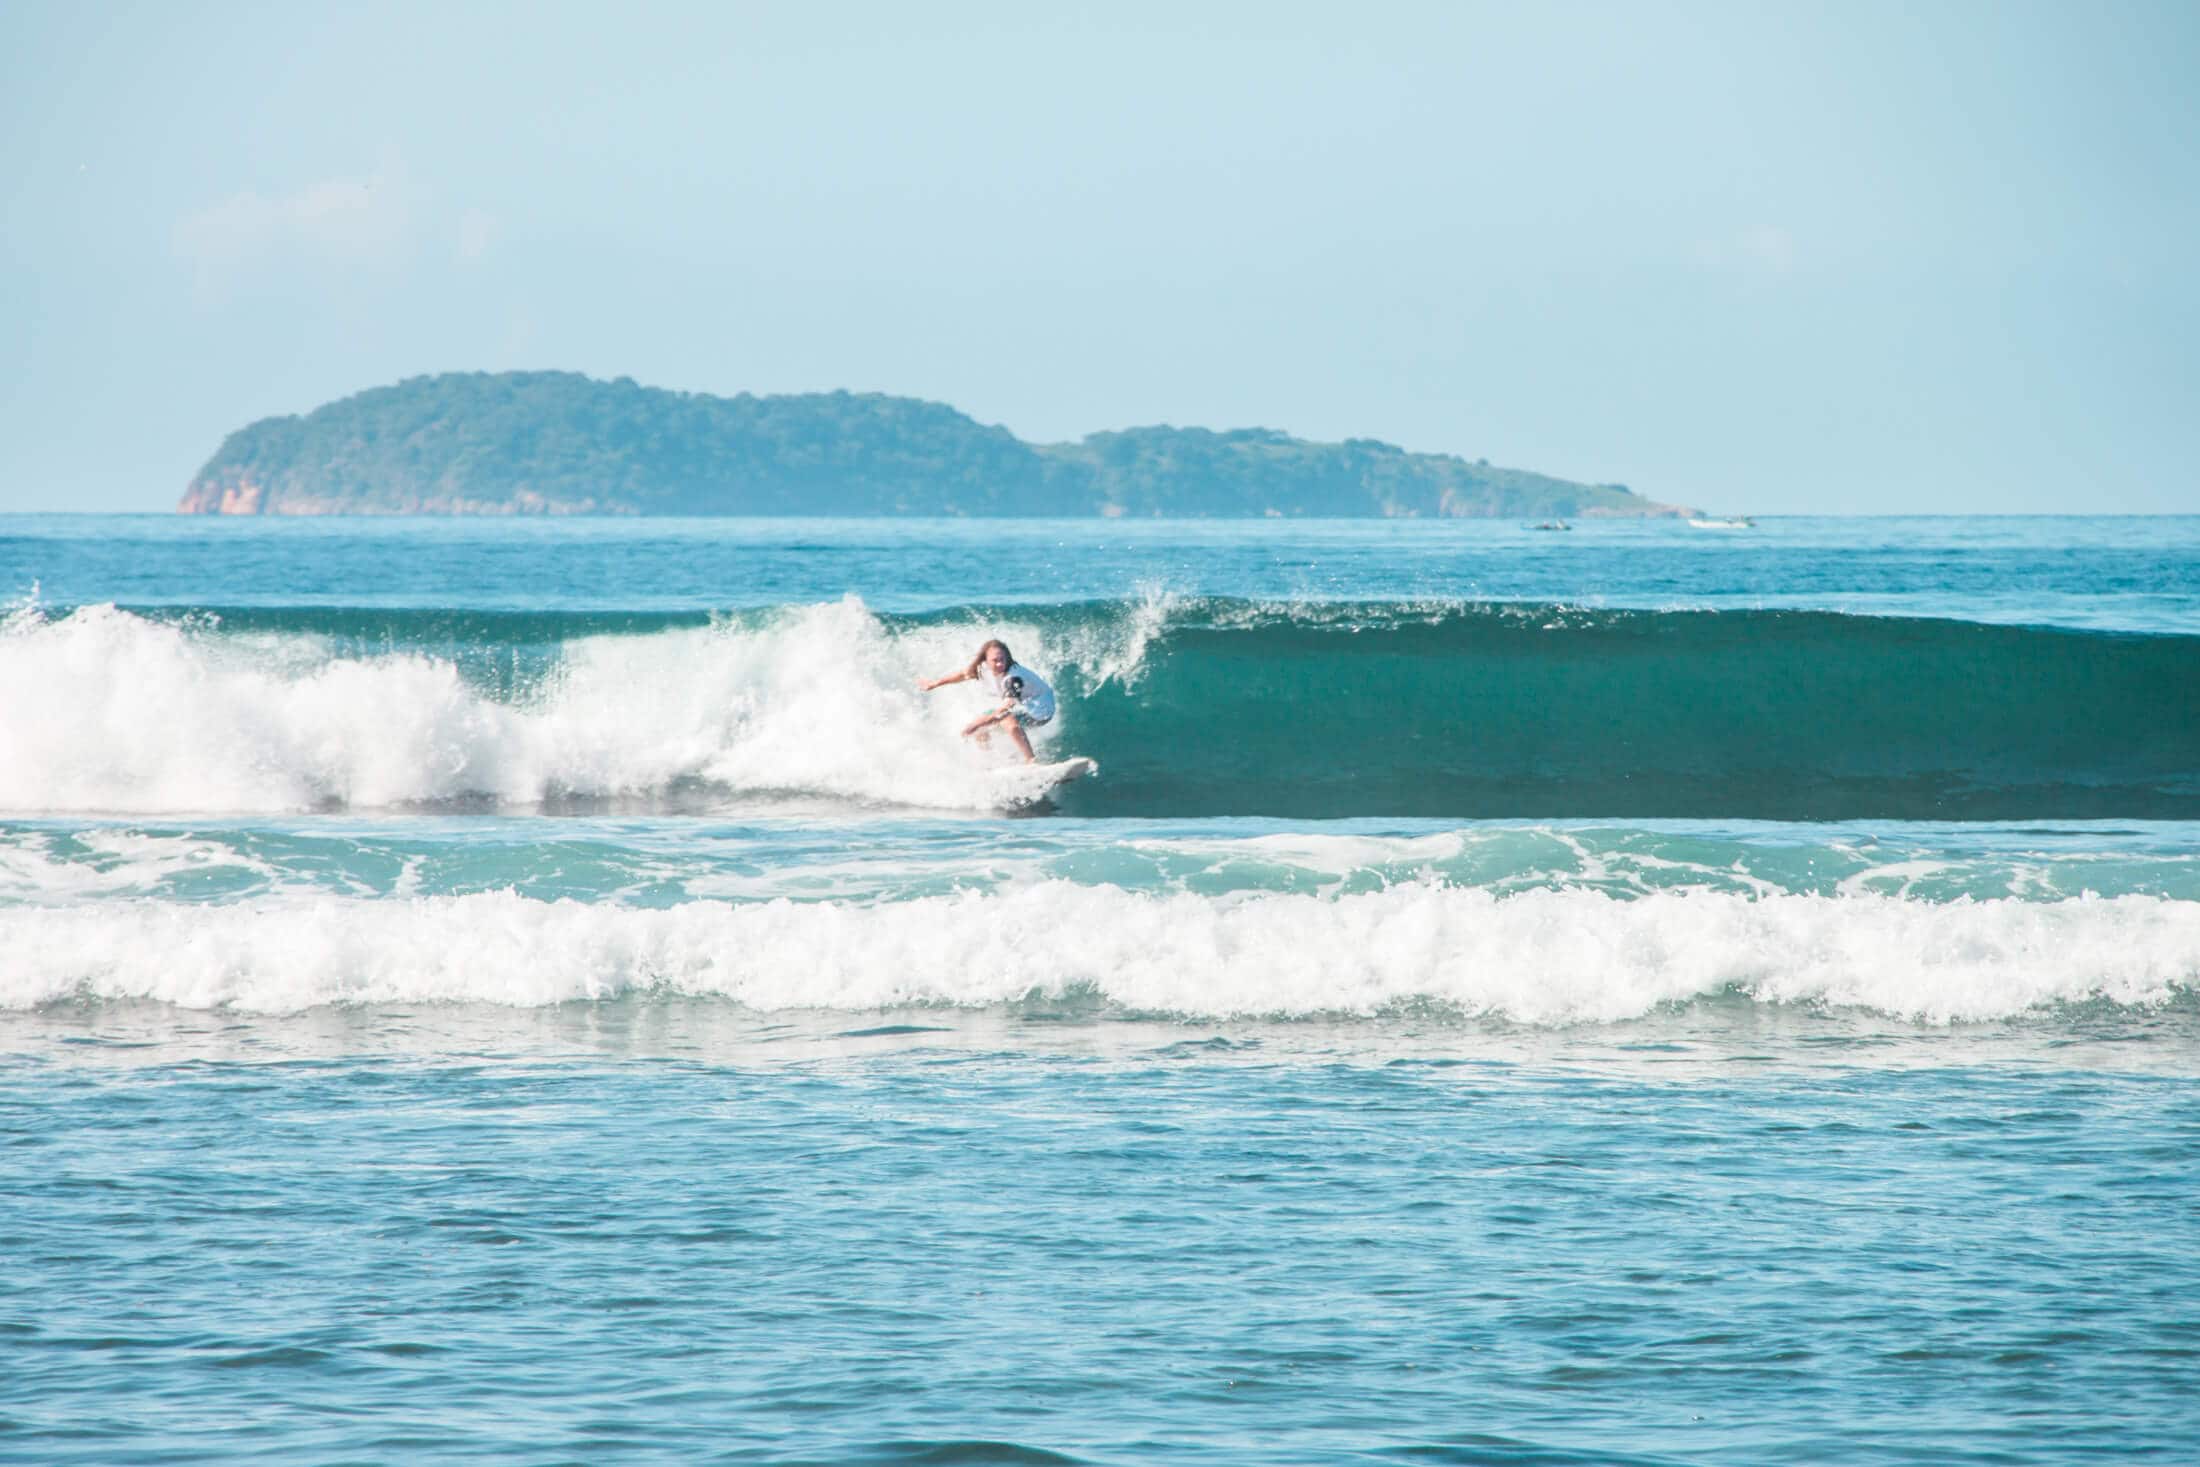 Surfing in Kertasari - Whales & Waves Resort in Sumbawa, Indonesia - The most amazing place I've ever been